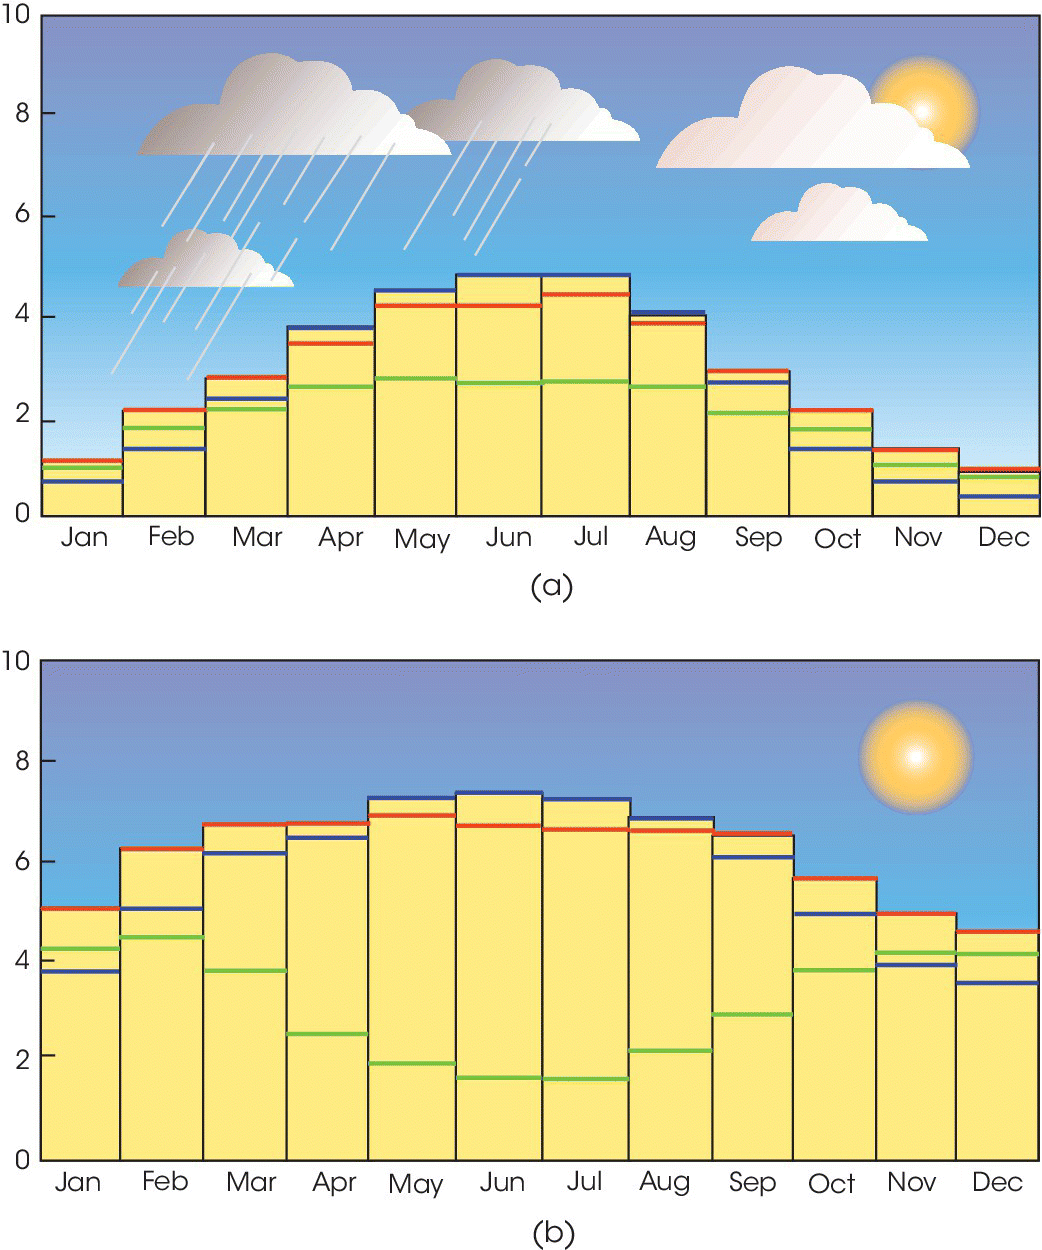 2 Histograms of the daily solar radiation in kWh/m2 on south‐facing inclined PV arrays in London (top) and the Sahara Desert (bottom), with discrete lines representing 3 values of tilt: 0°, latitude angle, and 90°.